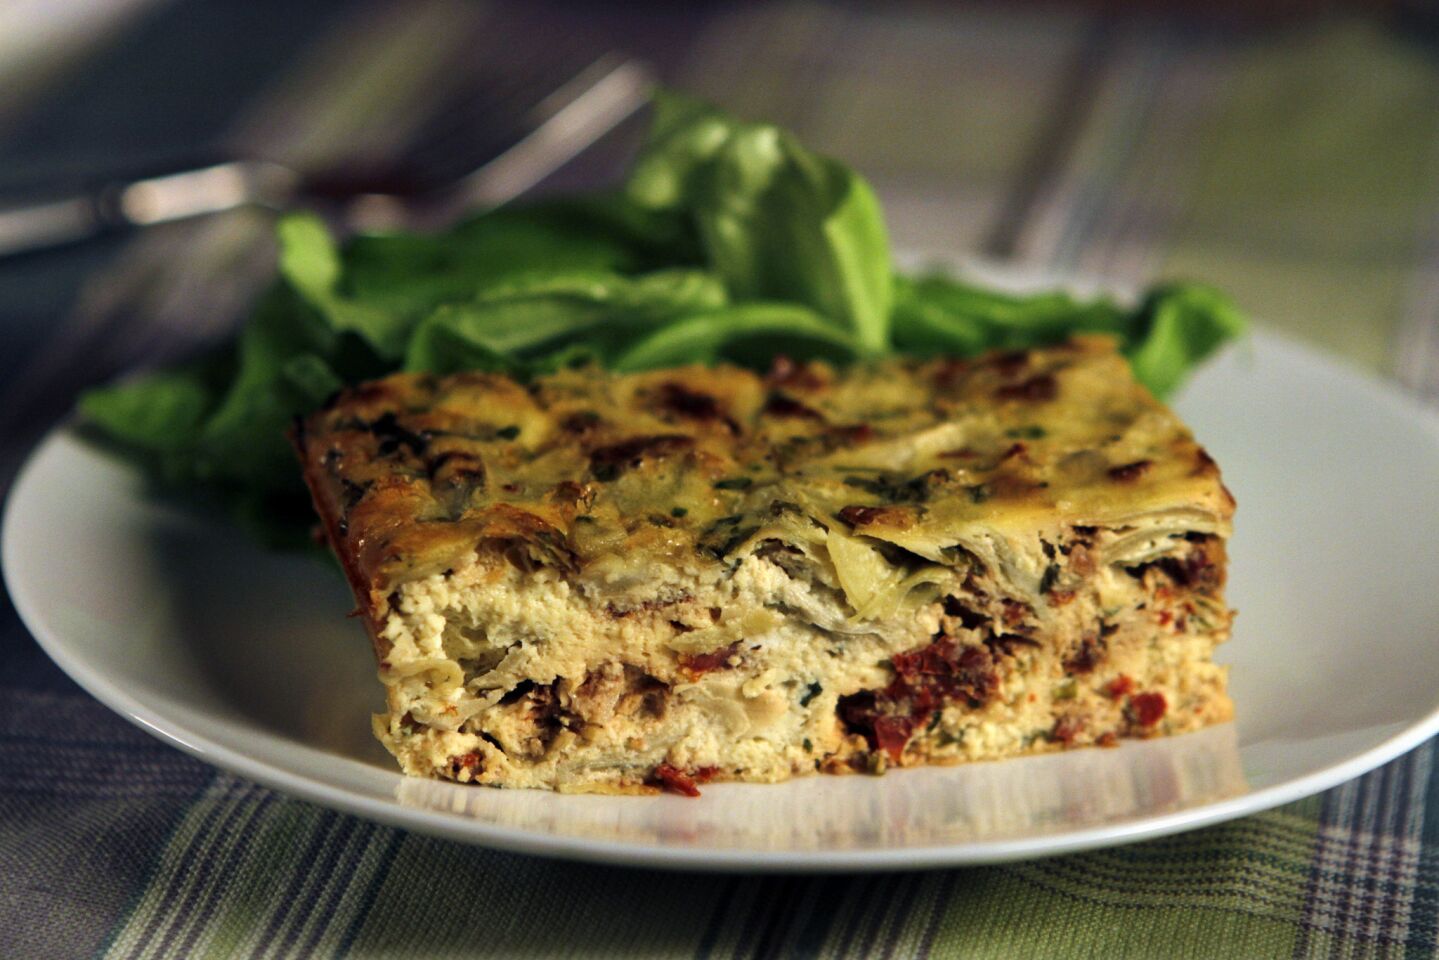 Artichoke and sun-dried tomatoes combine with two types of cheese and fresh herbs in this colorful dish. Recipe: Artichoke and sun-dried tomato frittata